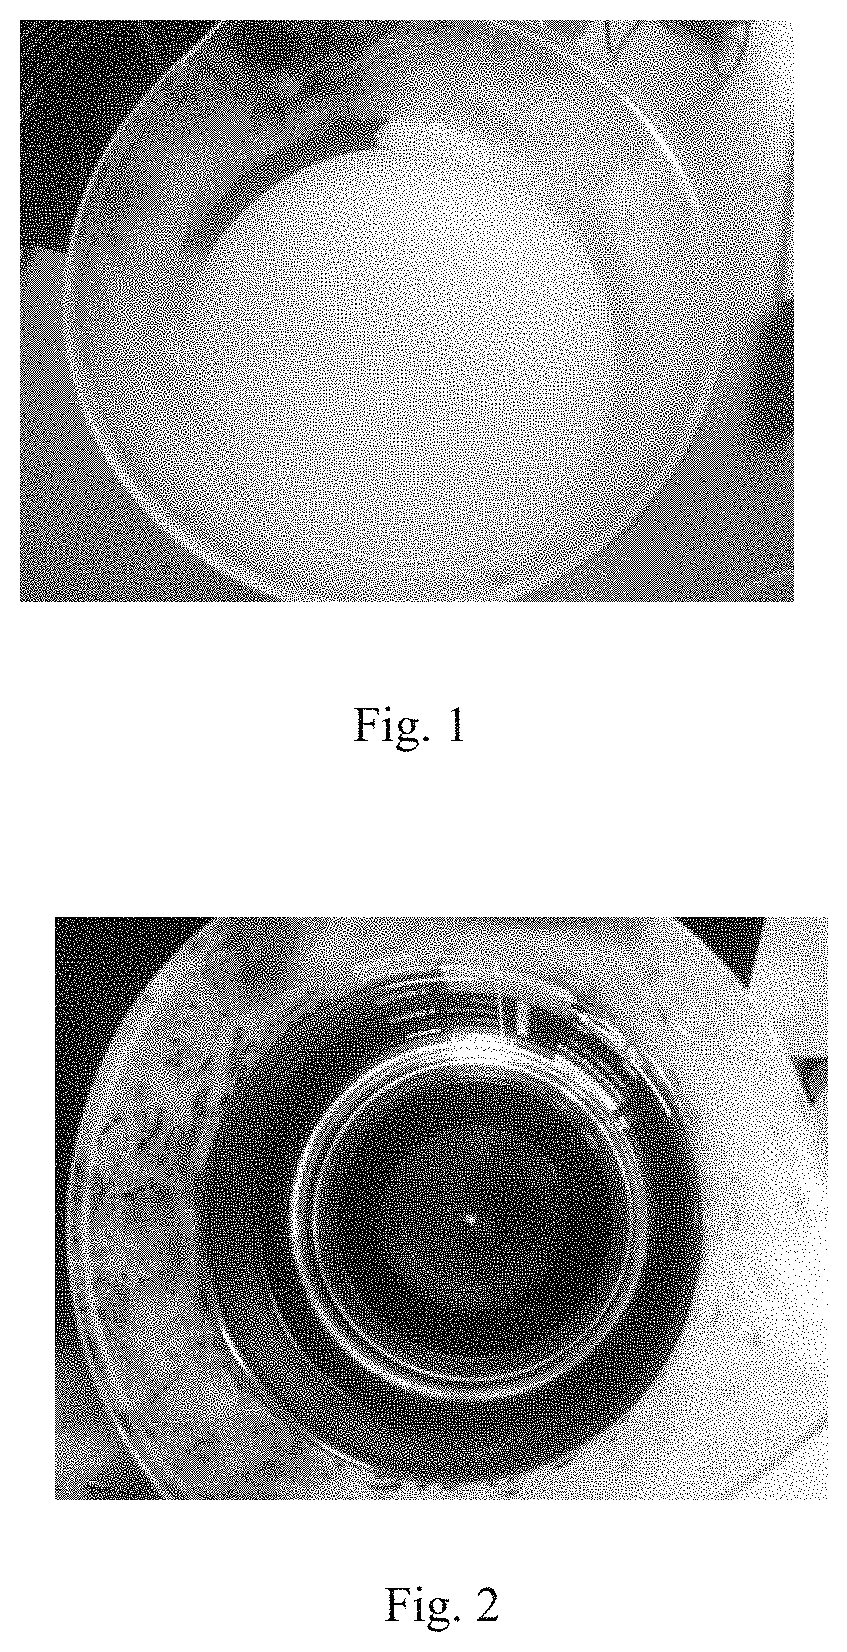 Method of green and safe preservation for aquatic products at sea